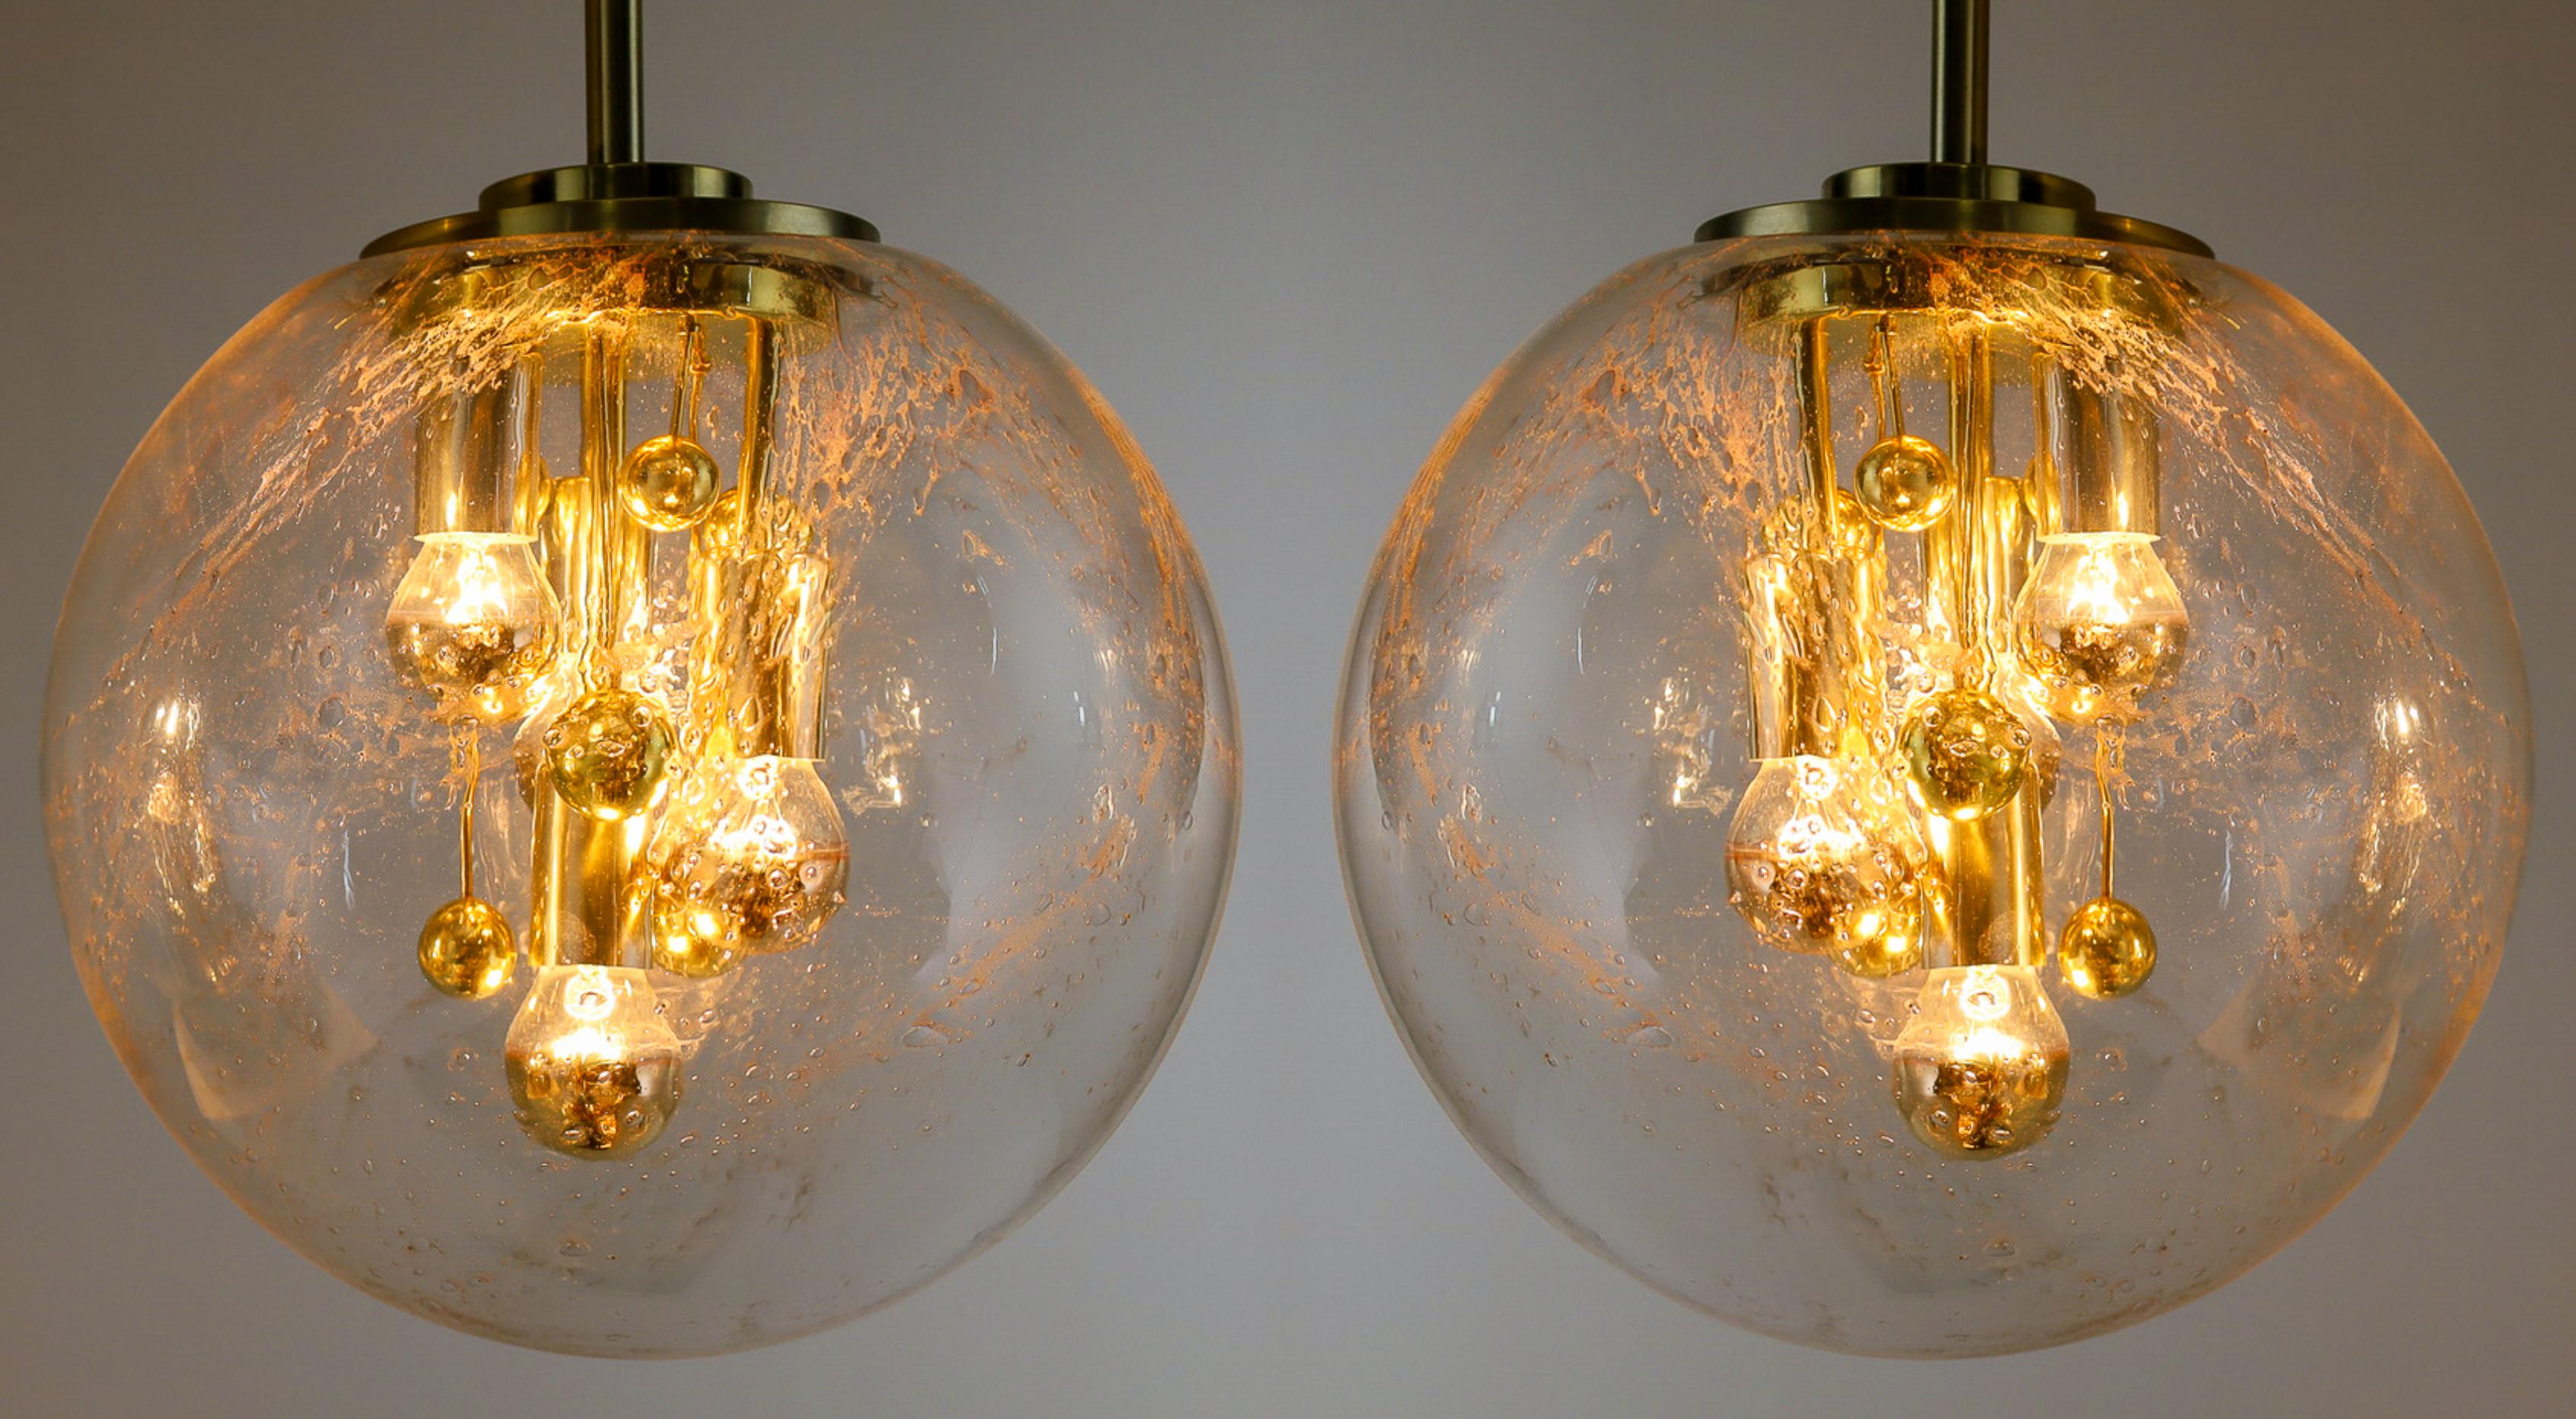 Pair of large Doria globe pendant lights, art-glass and brass, Germany 1970s. These heavy quality light sculptures not only function as light sources but also as a sculptural components. The arrangement is reminiscent of the Atomium structure in